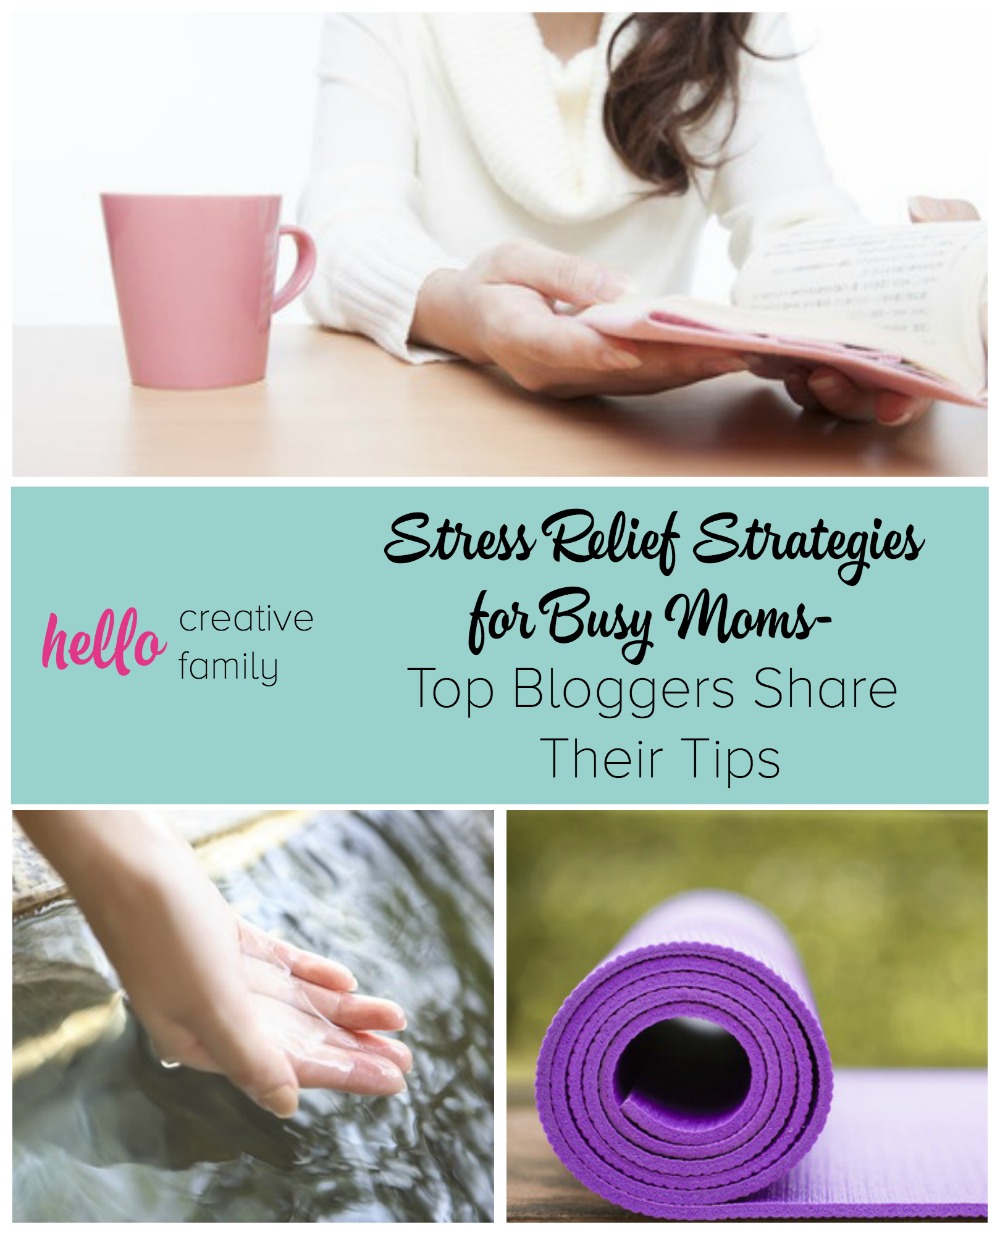 Stress Relief Strategies for Busy Moms Top Bloggers Share their Tips